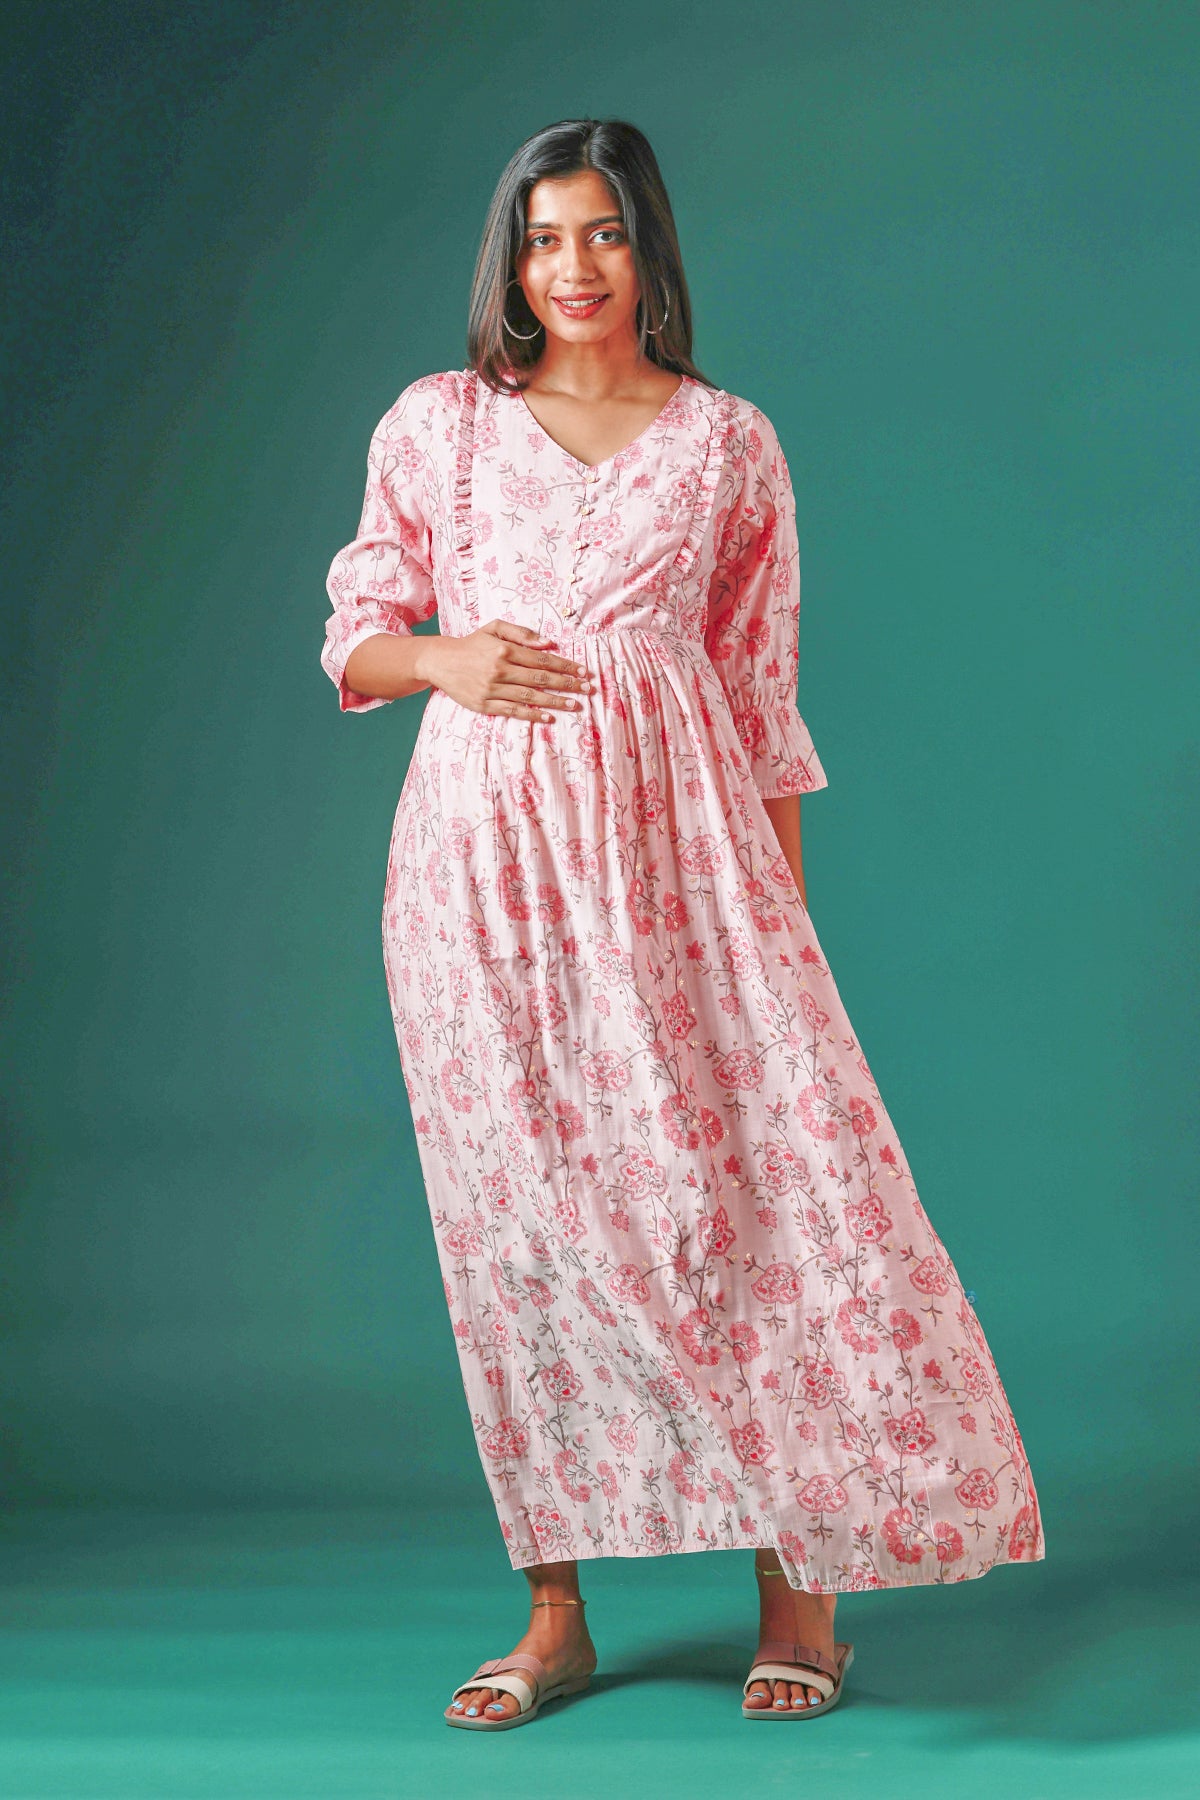 All Over Floral Printed Maternity Dress with Ruffled Yoke - Pink